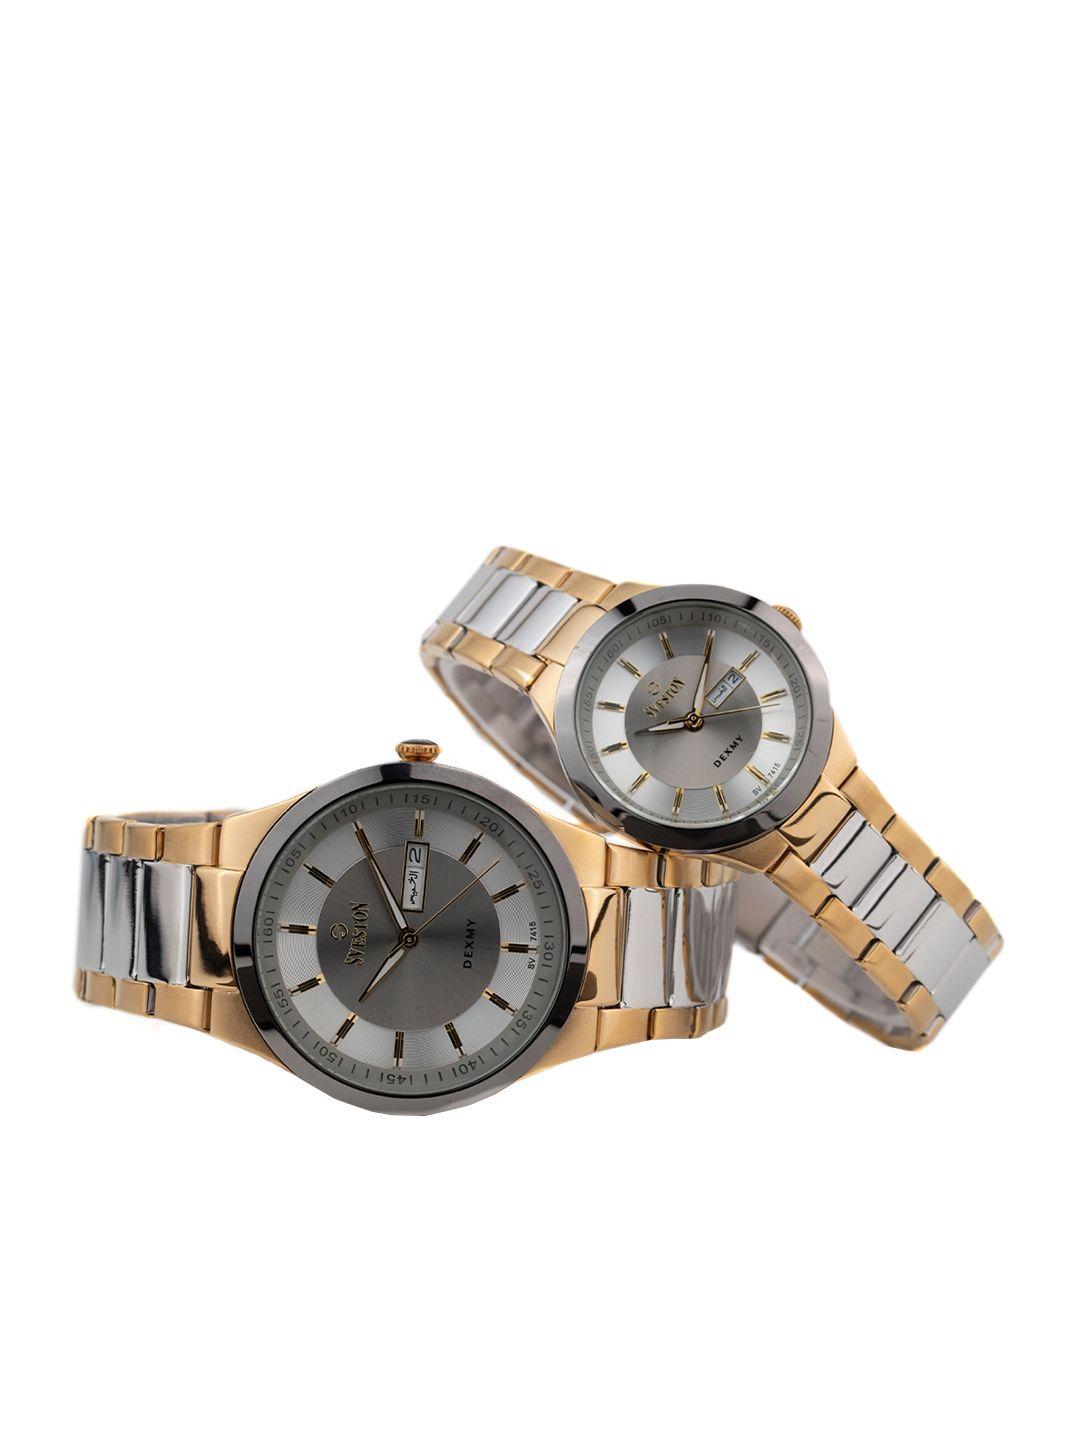 sveston textured dial & stainless steel straps analogue his and her watches sv-7415csg2s